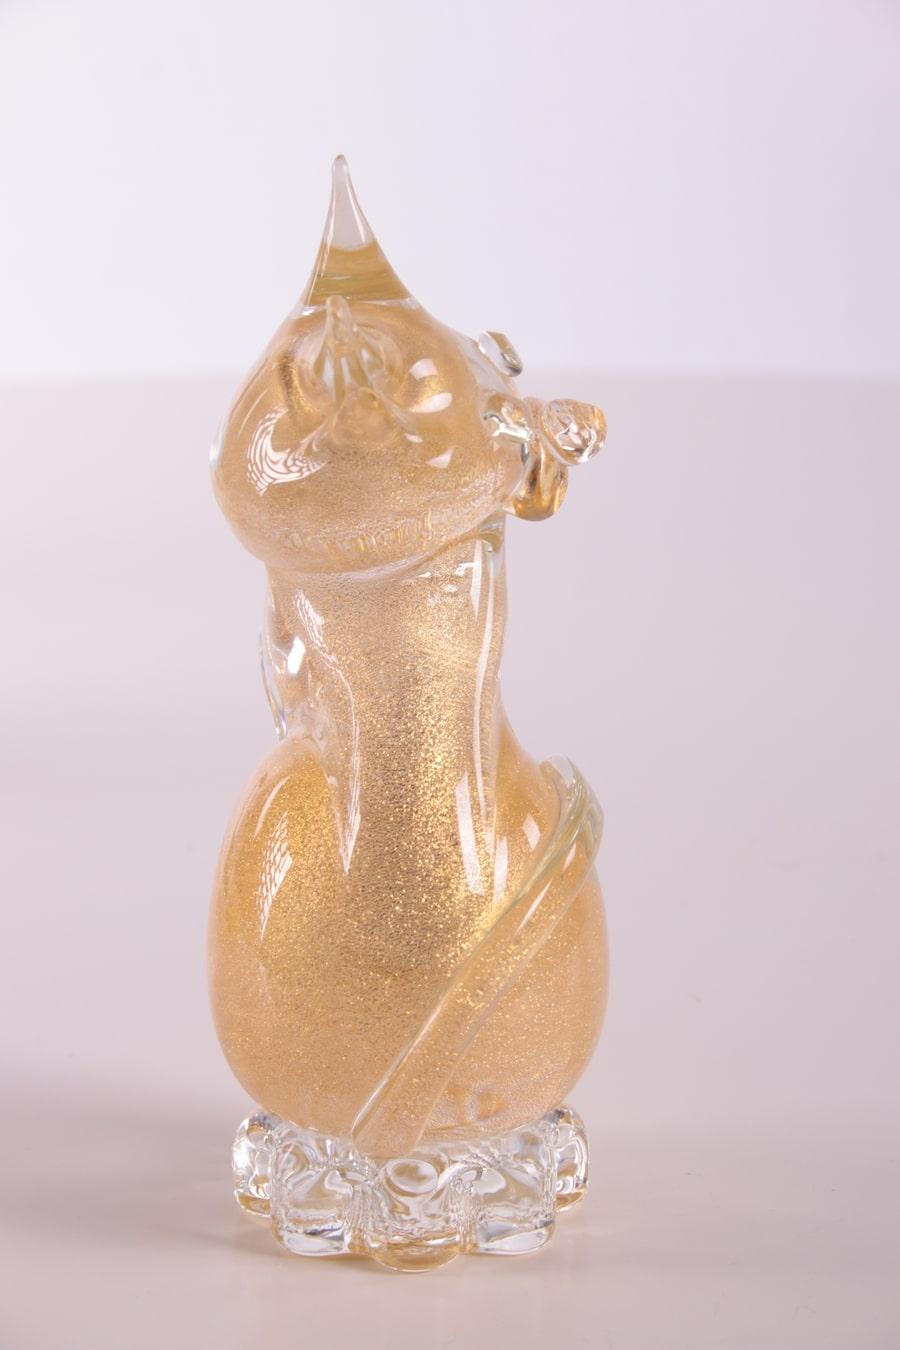 Murano Vintage Cat With Gold Accents

Additional information:
Dimensions: 11 W x 7 D x 18 H cm
Period of Time: 1960
Country of origin: Italy
Condition: Very good